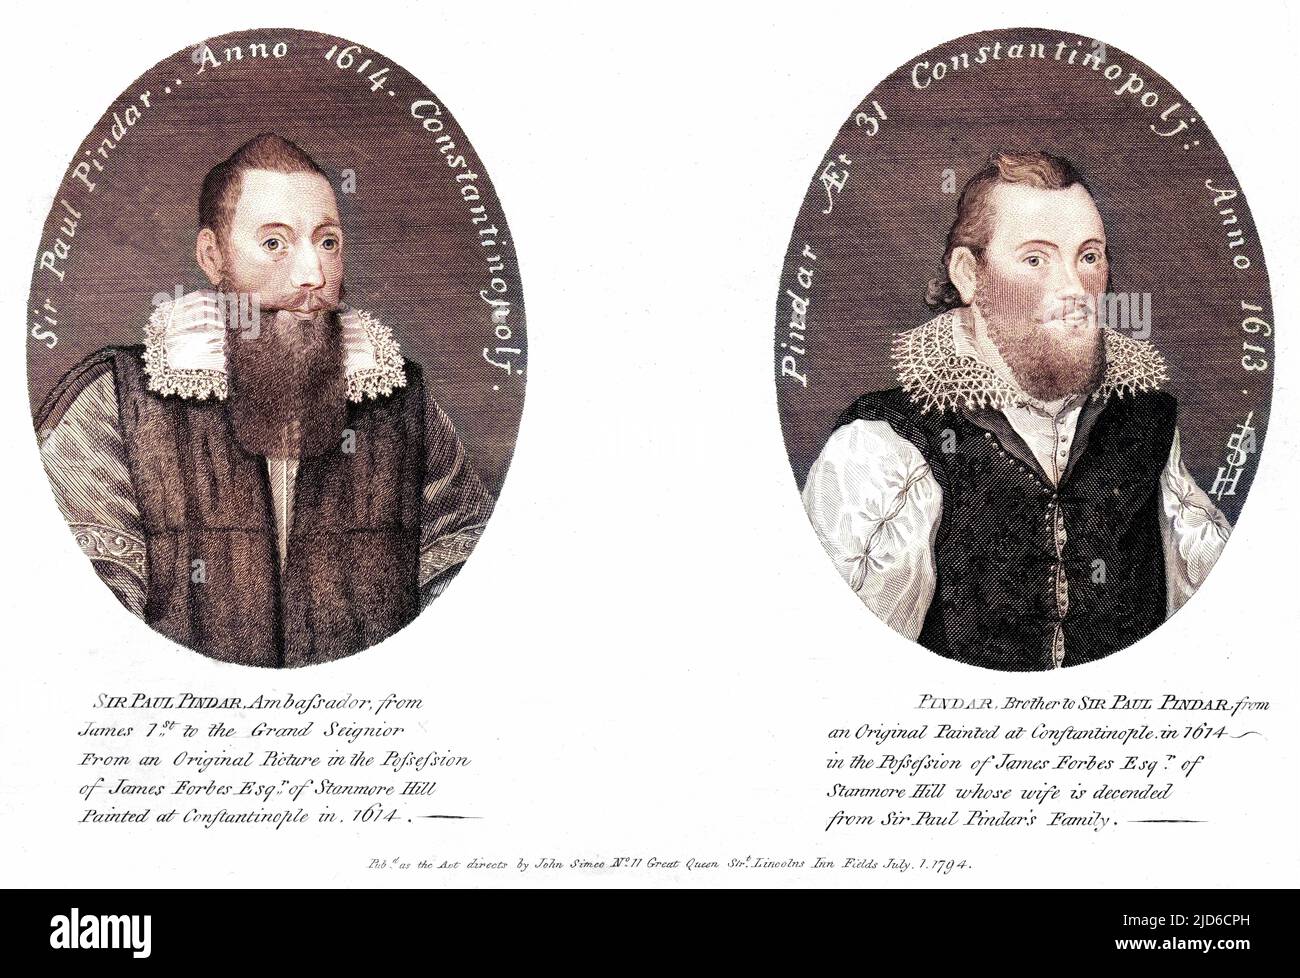 PAUL PINDAR merchant and diplomat in Turkey, at age 48, with his brother Ralph, aged 31. Colourised version of : 10172644       Date: 1565 - 1650 Stock Photo